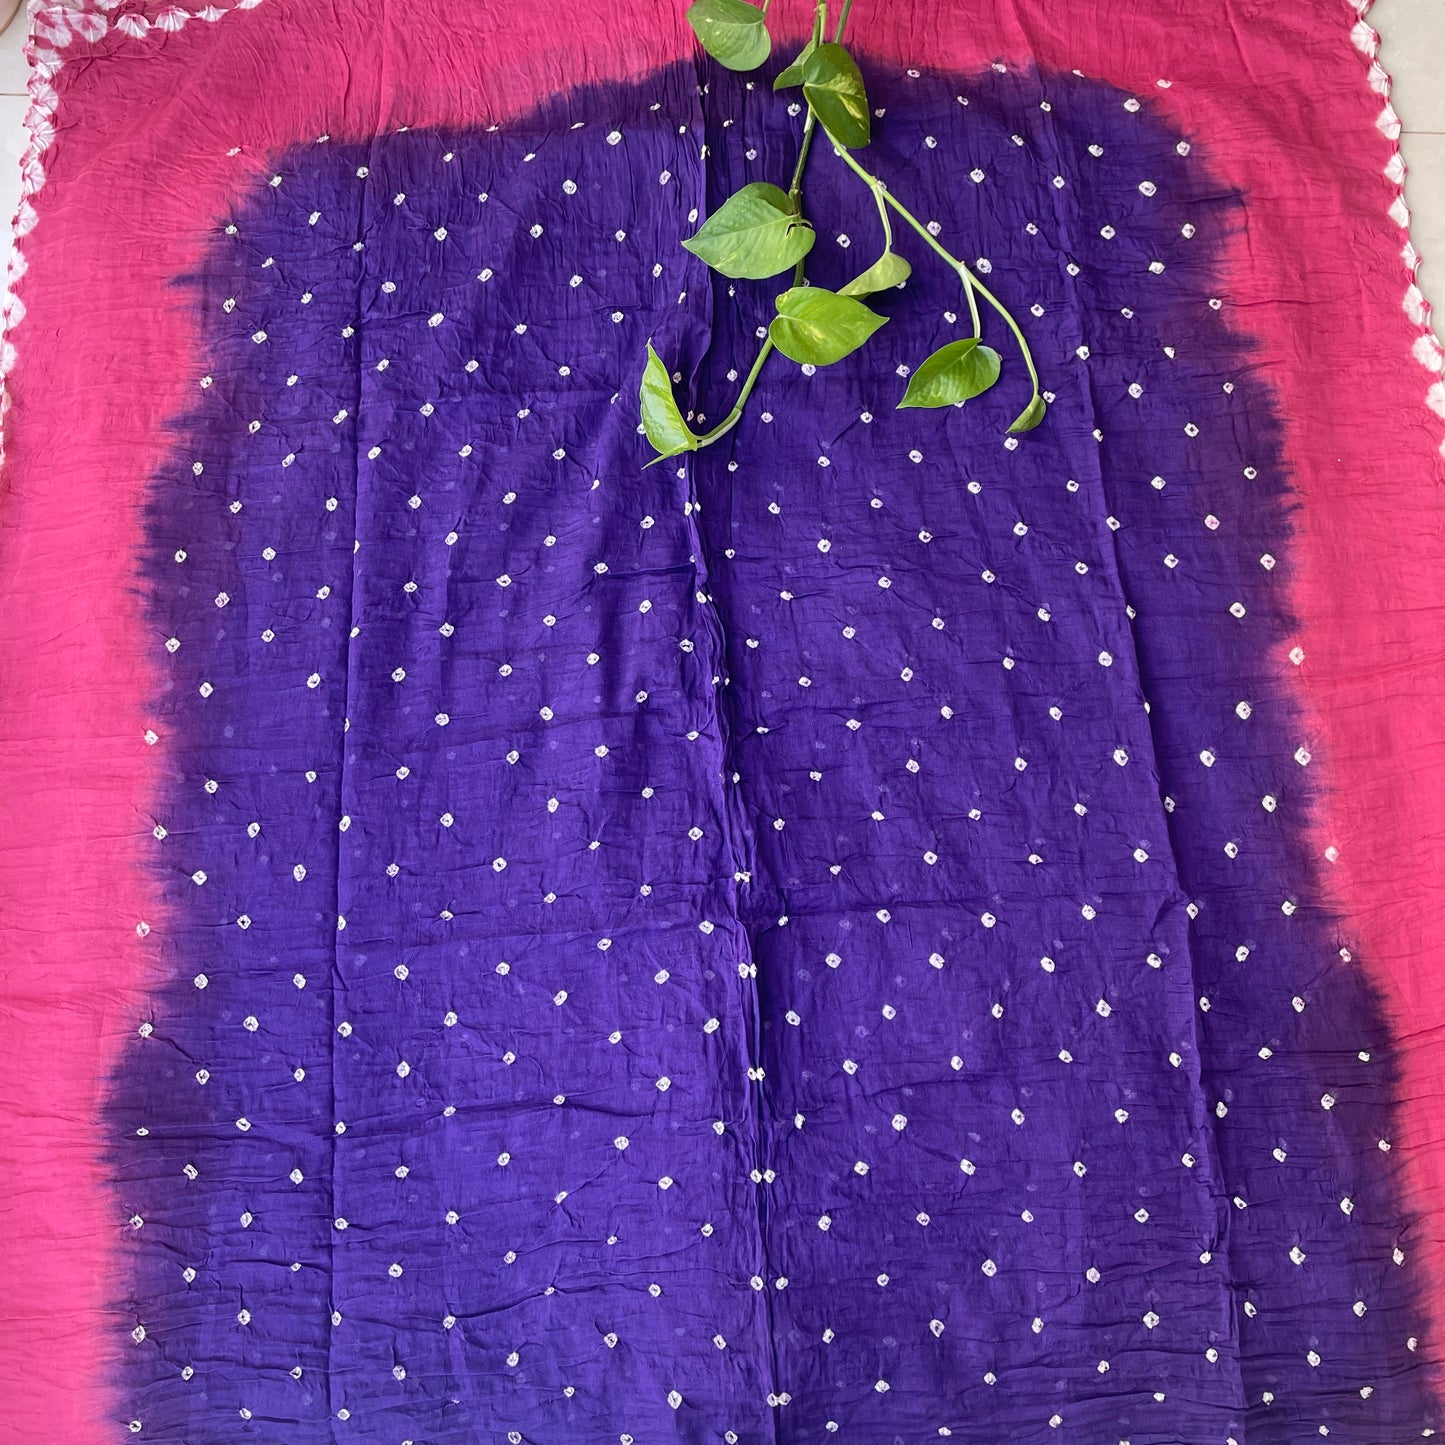 Hand Tied Bandhani Unstitched Salwar Suit Fabric - Pink and Purple